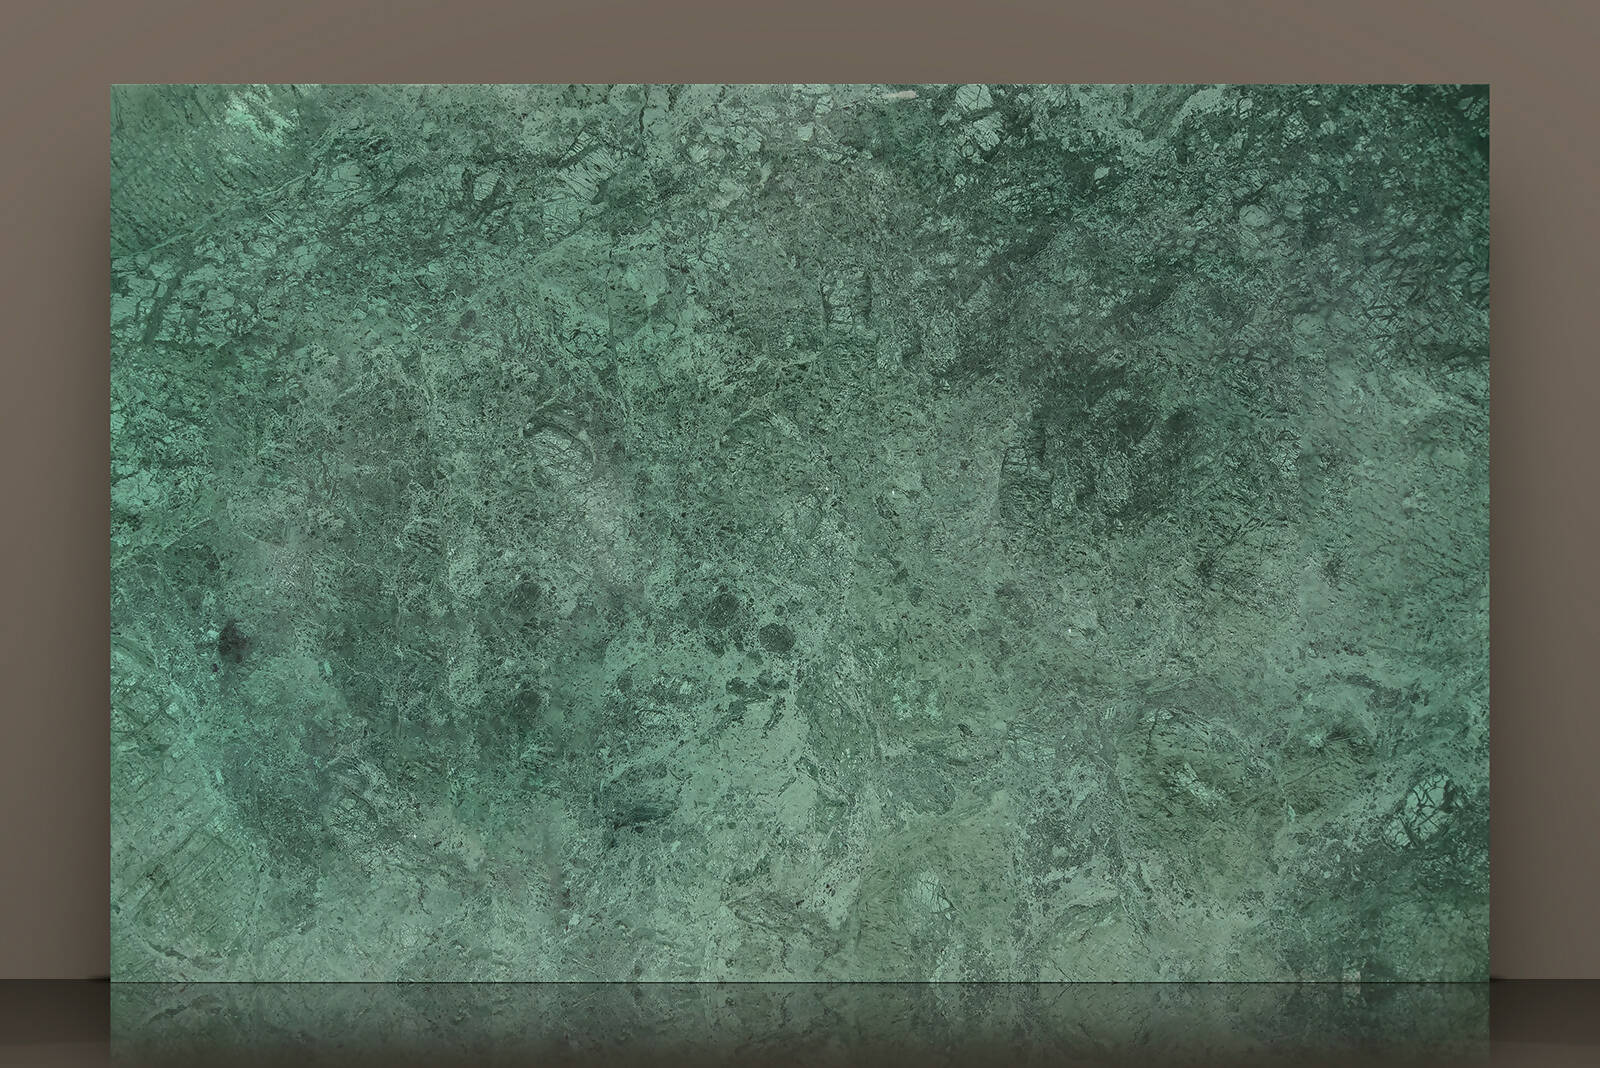 INDIA GREEN MARBLE,Marble,Sonic Stone,www.work-tops.com